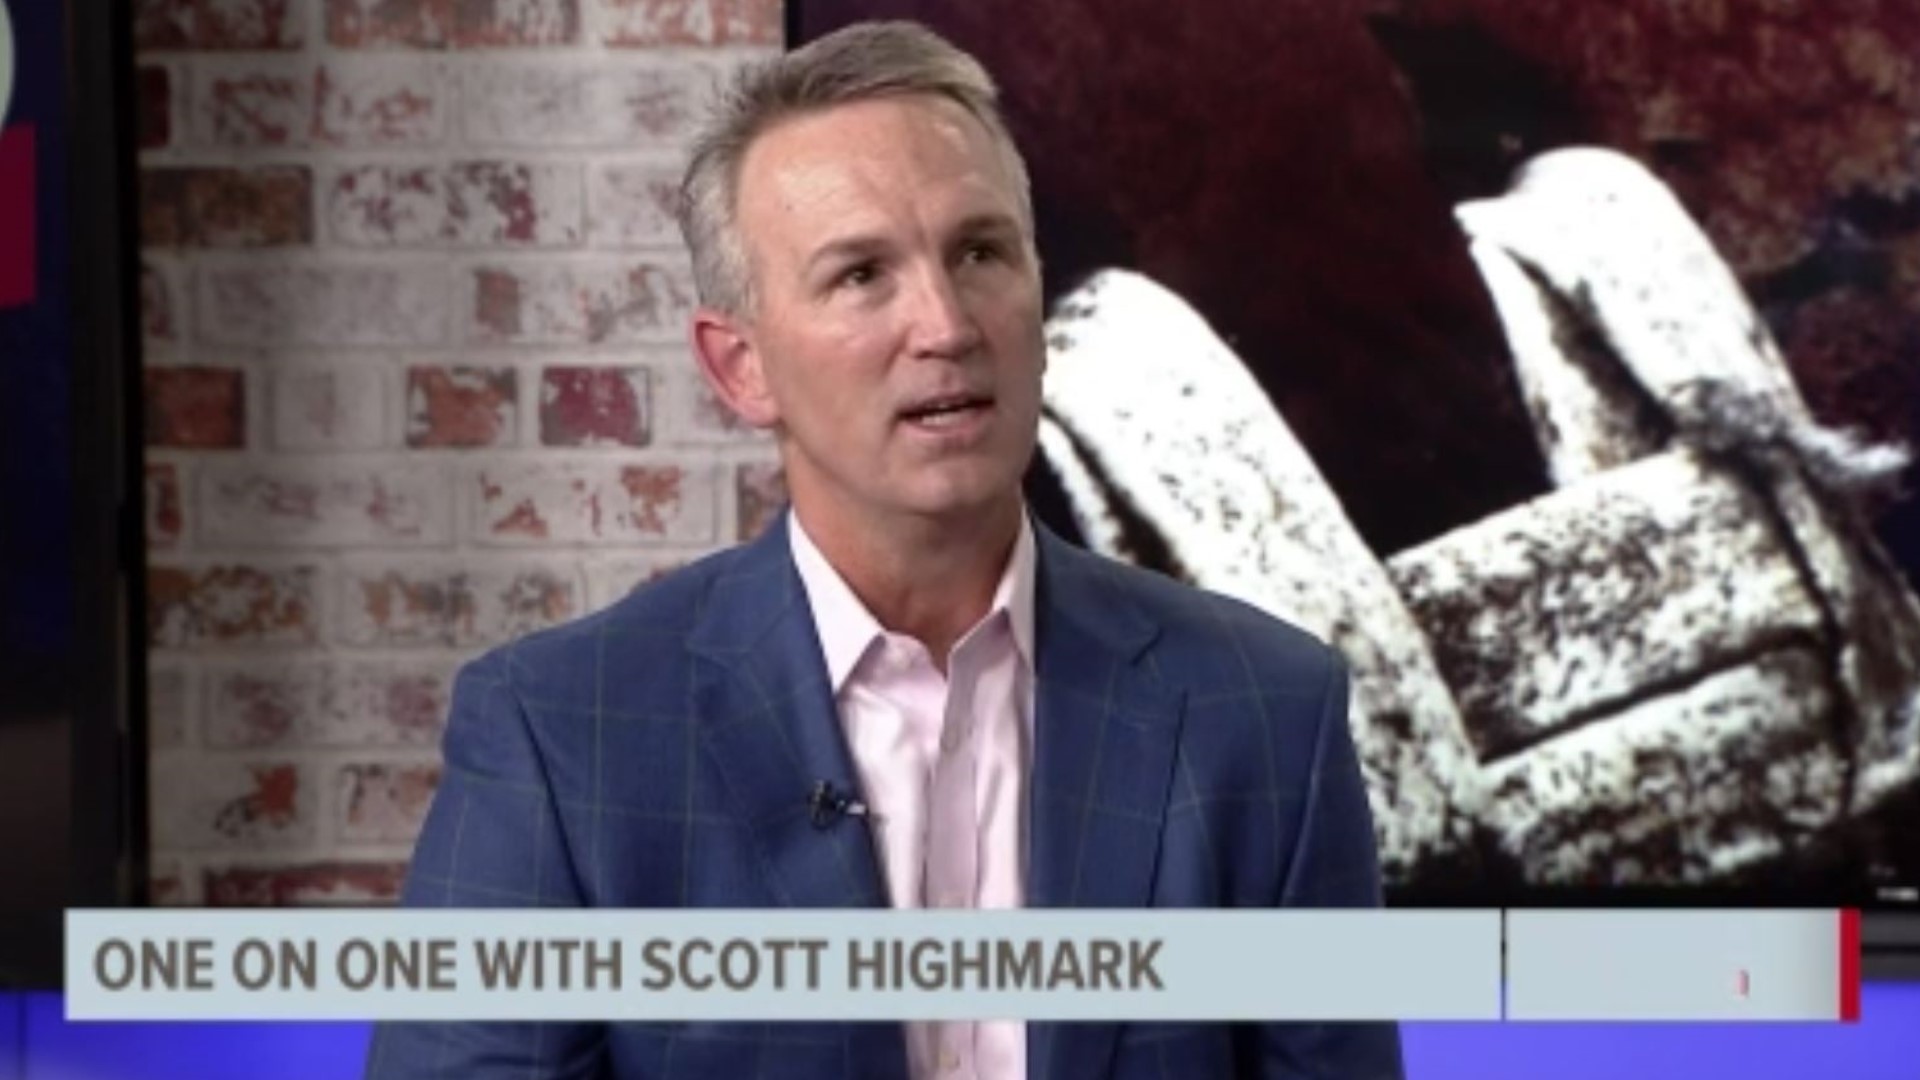 Frank Cusumano sits down with former SLU player Scott Highmark to discuss the team's head coach search. They also discuss this year's March Madness tournament.